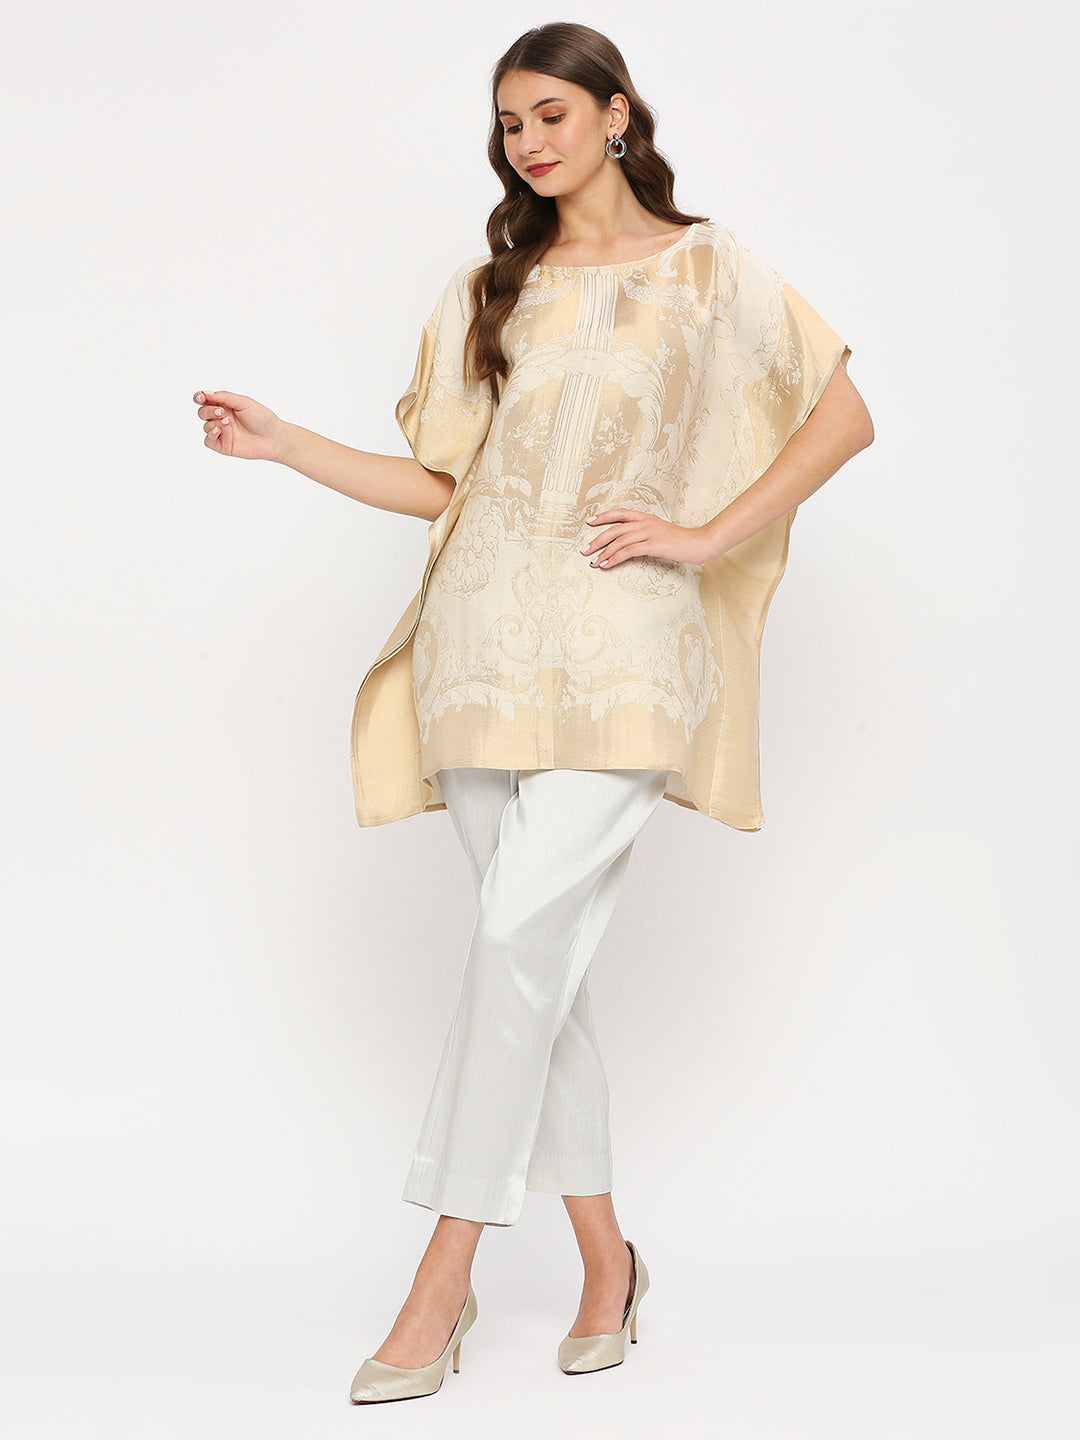 Brocade French Patterned Design Off-White Poncho